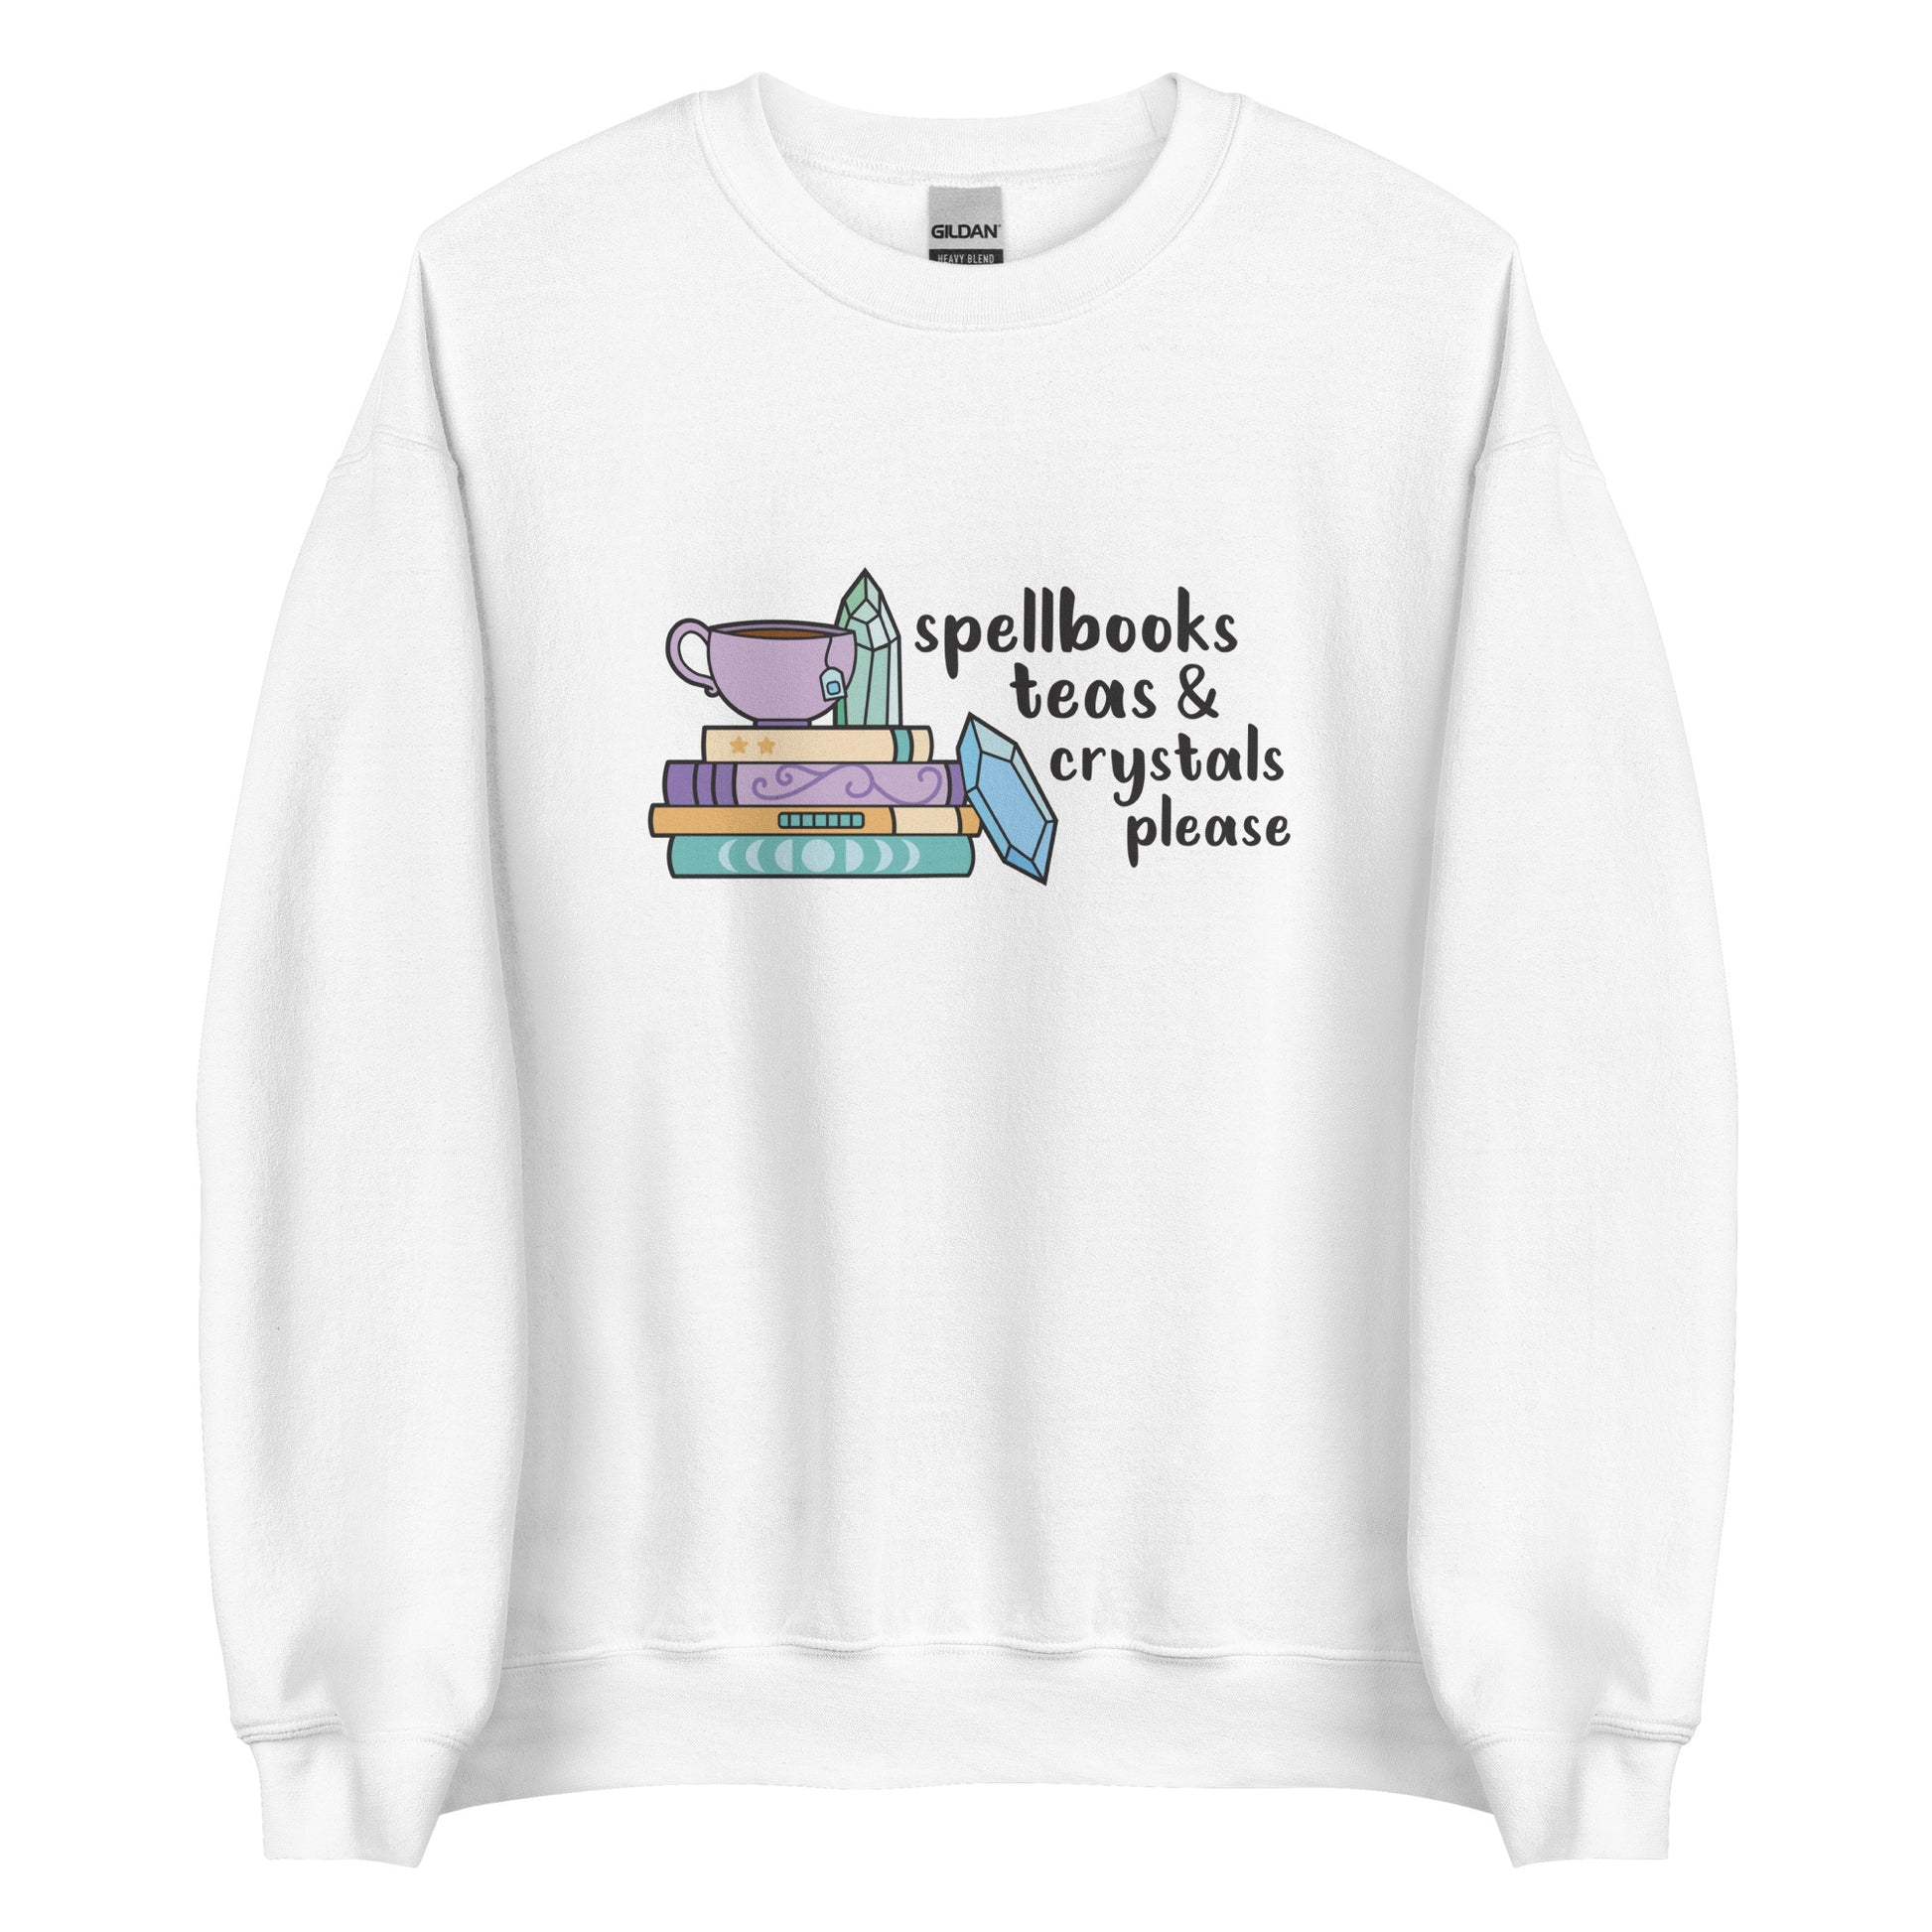 A white crewneck sweatshirt featuring an illustration of a stack of spellbooks with a teacup and a crystal resting on top. Another crystal rests on the side of the stack, and text next to the illustration reads "Spellbooks, teas & crystals please"